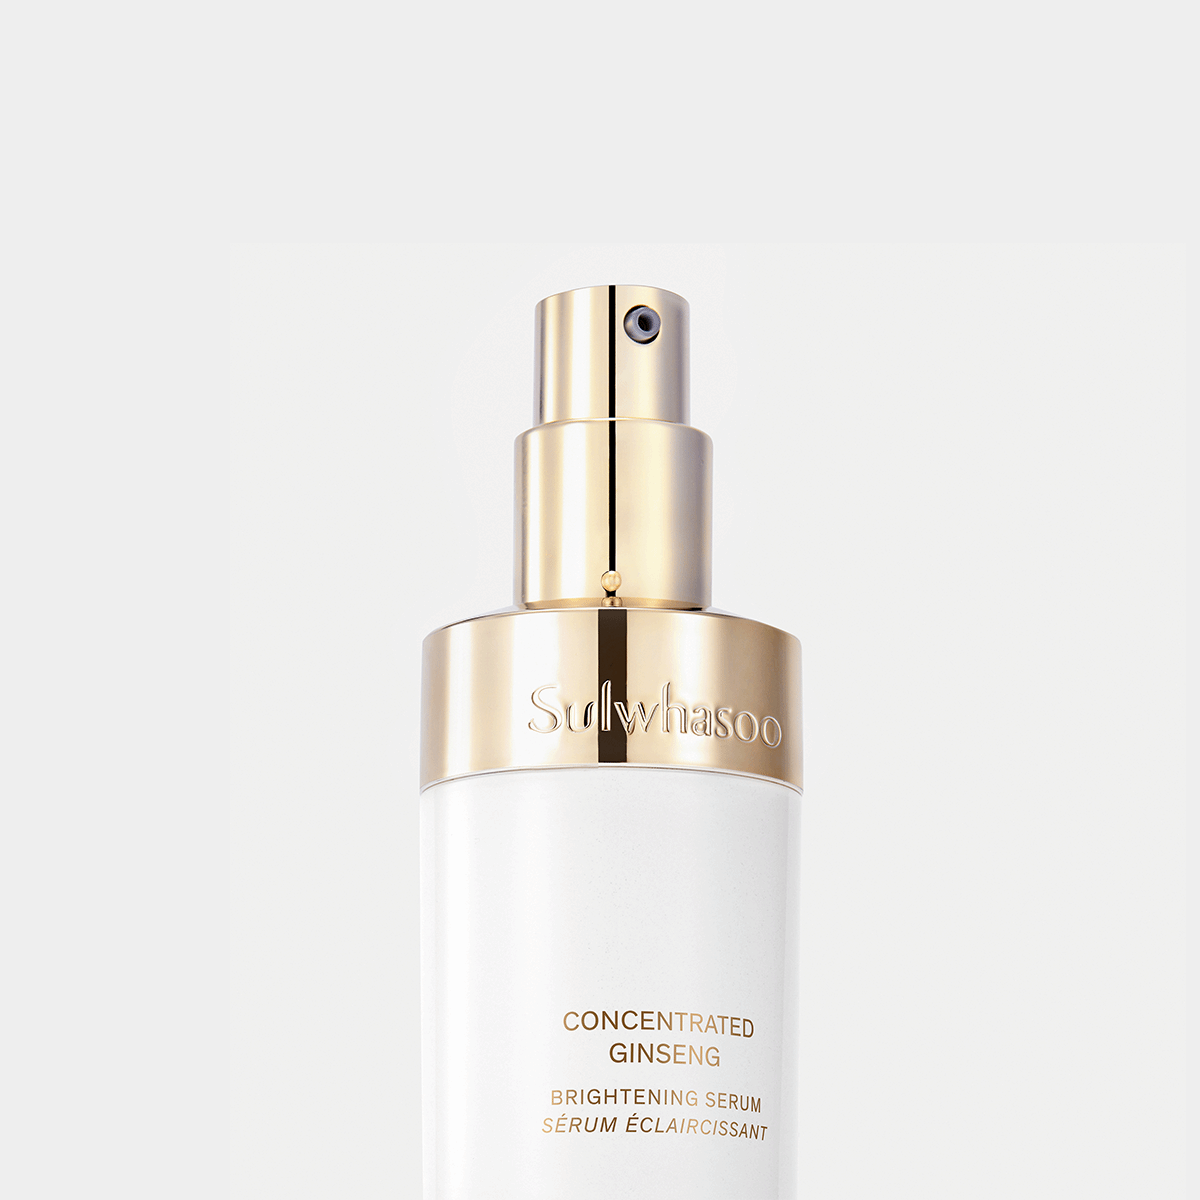 Sulwhasoo Concentrated Ginseng Brightening Serum 50ML